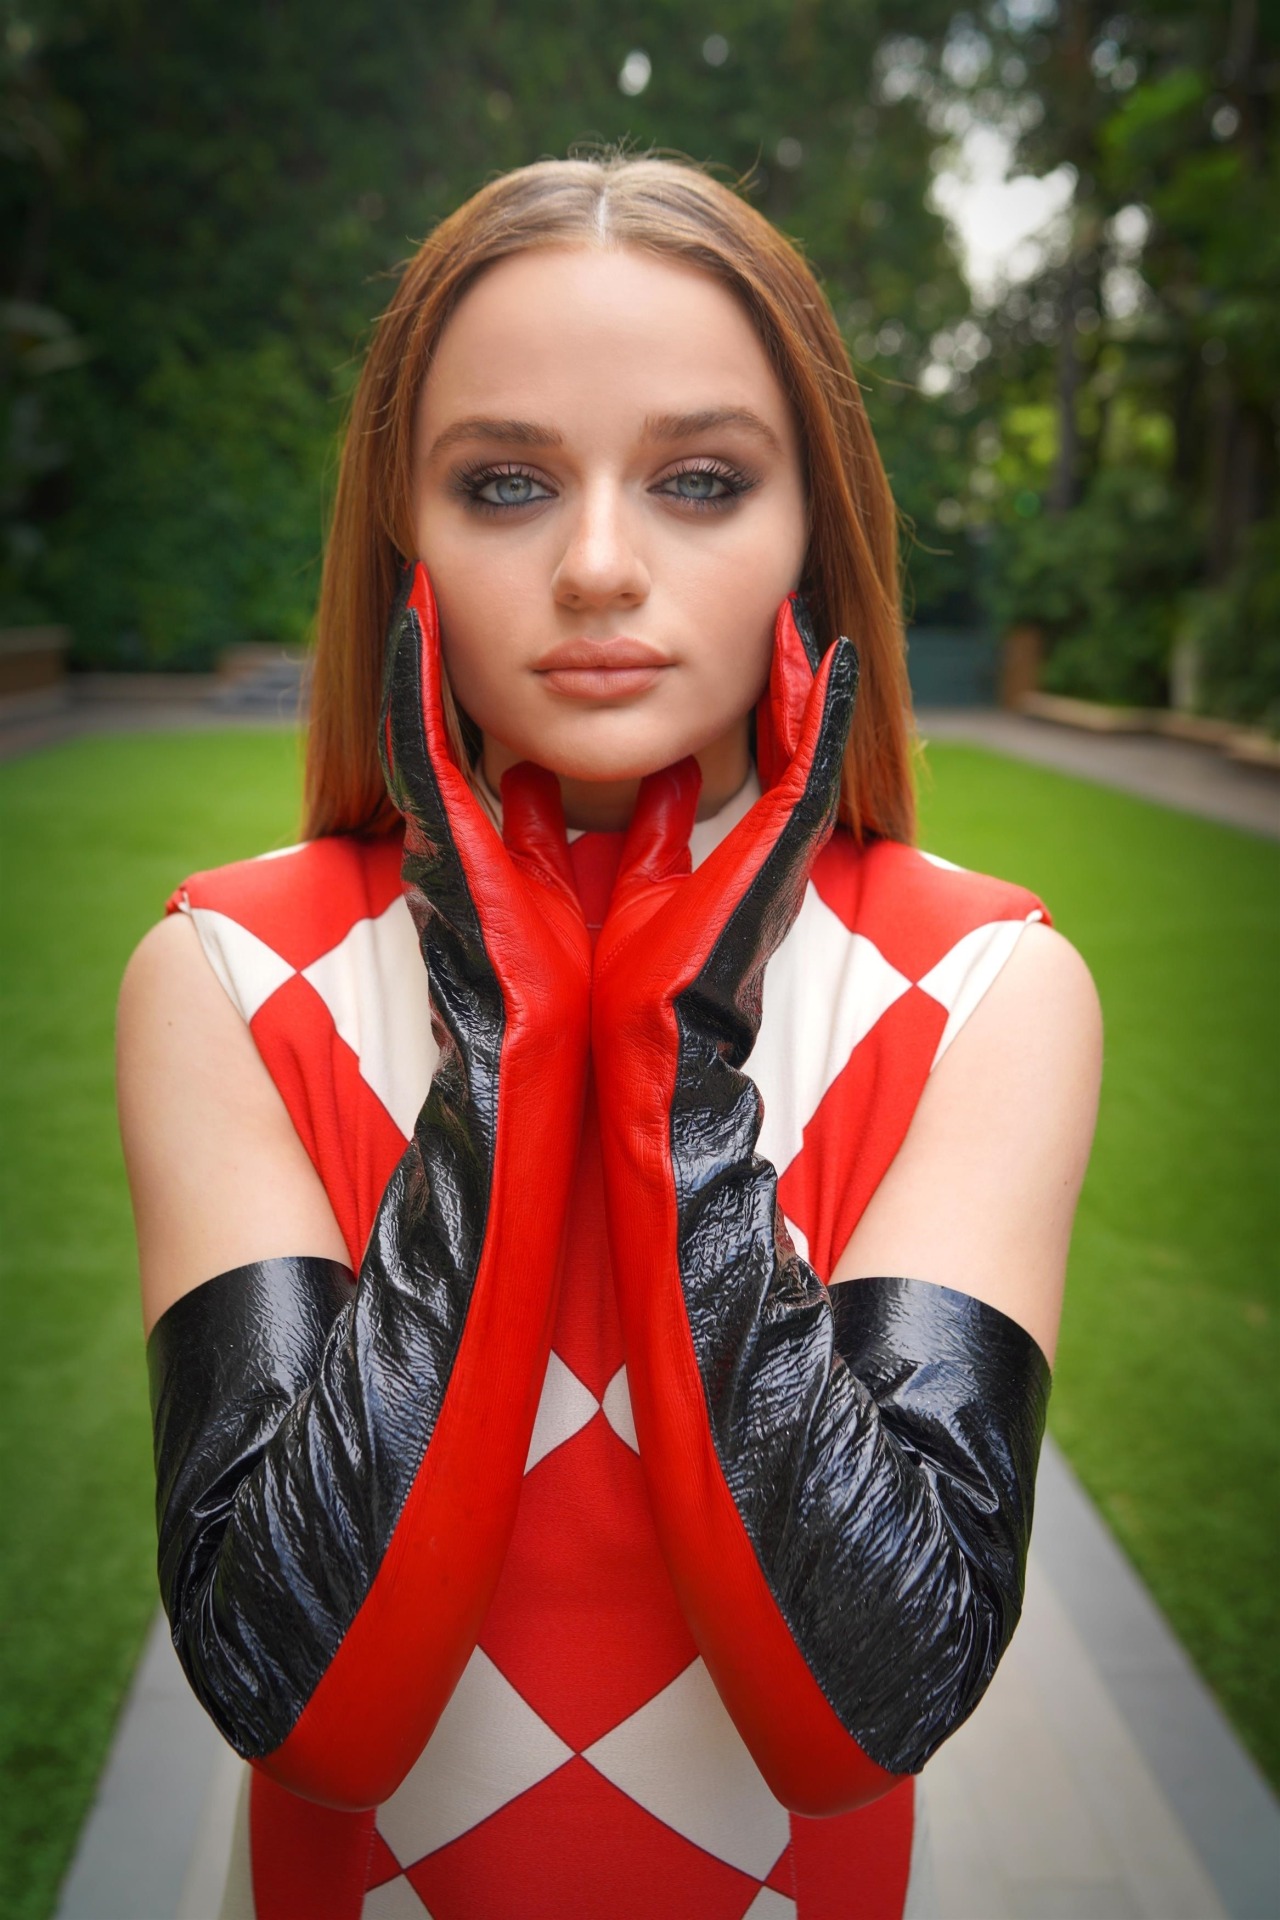 Joey King The Kissing Booth Promo Pt 3 #joey king #black leather gloves  #red leather gloves #leather gloves#gloves#harlequin dress #the kissing booth 3  #the kissing booth #netflix#advertising#campaign#fashion